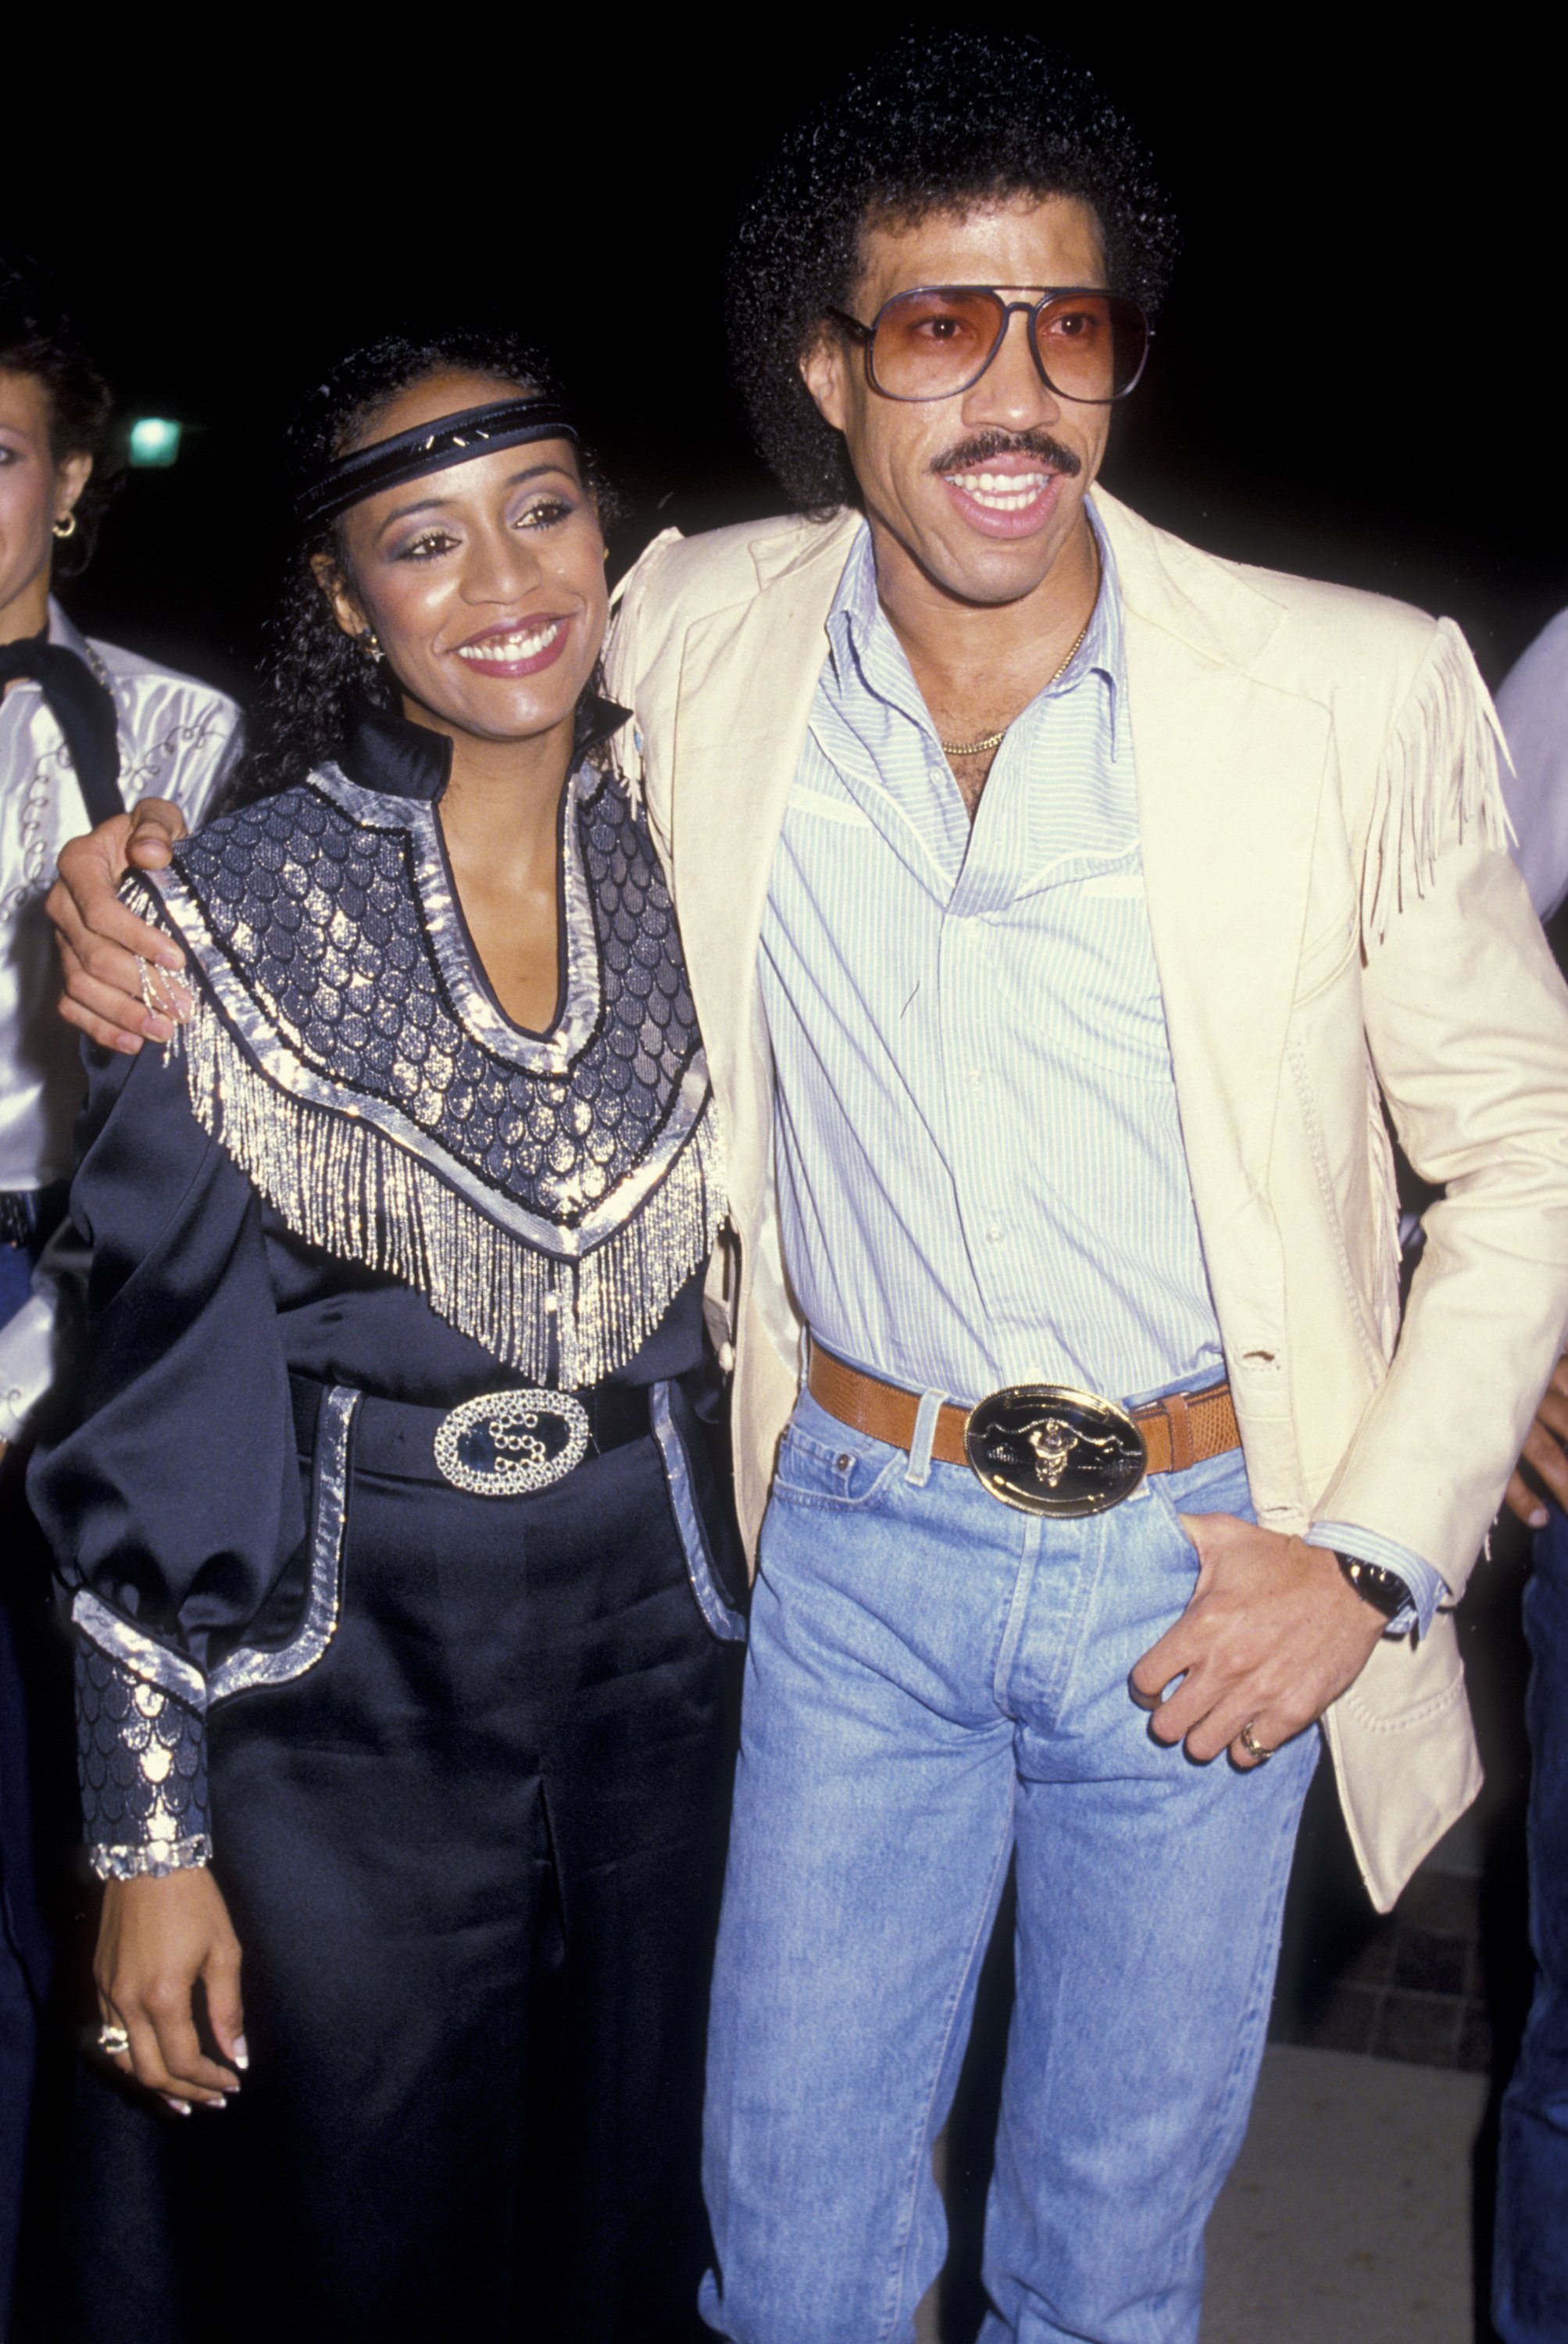 Lionel Richie and Brenda Harvey attend Share Boomtown Party on April 28, 1984 at the Pauley Pavilion at UCLA Campus in Westwood, California | Photo: GettyImages